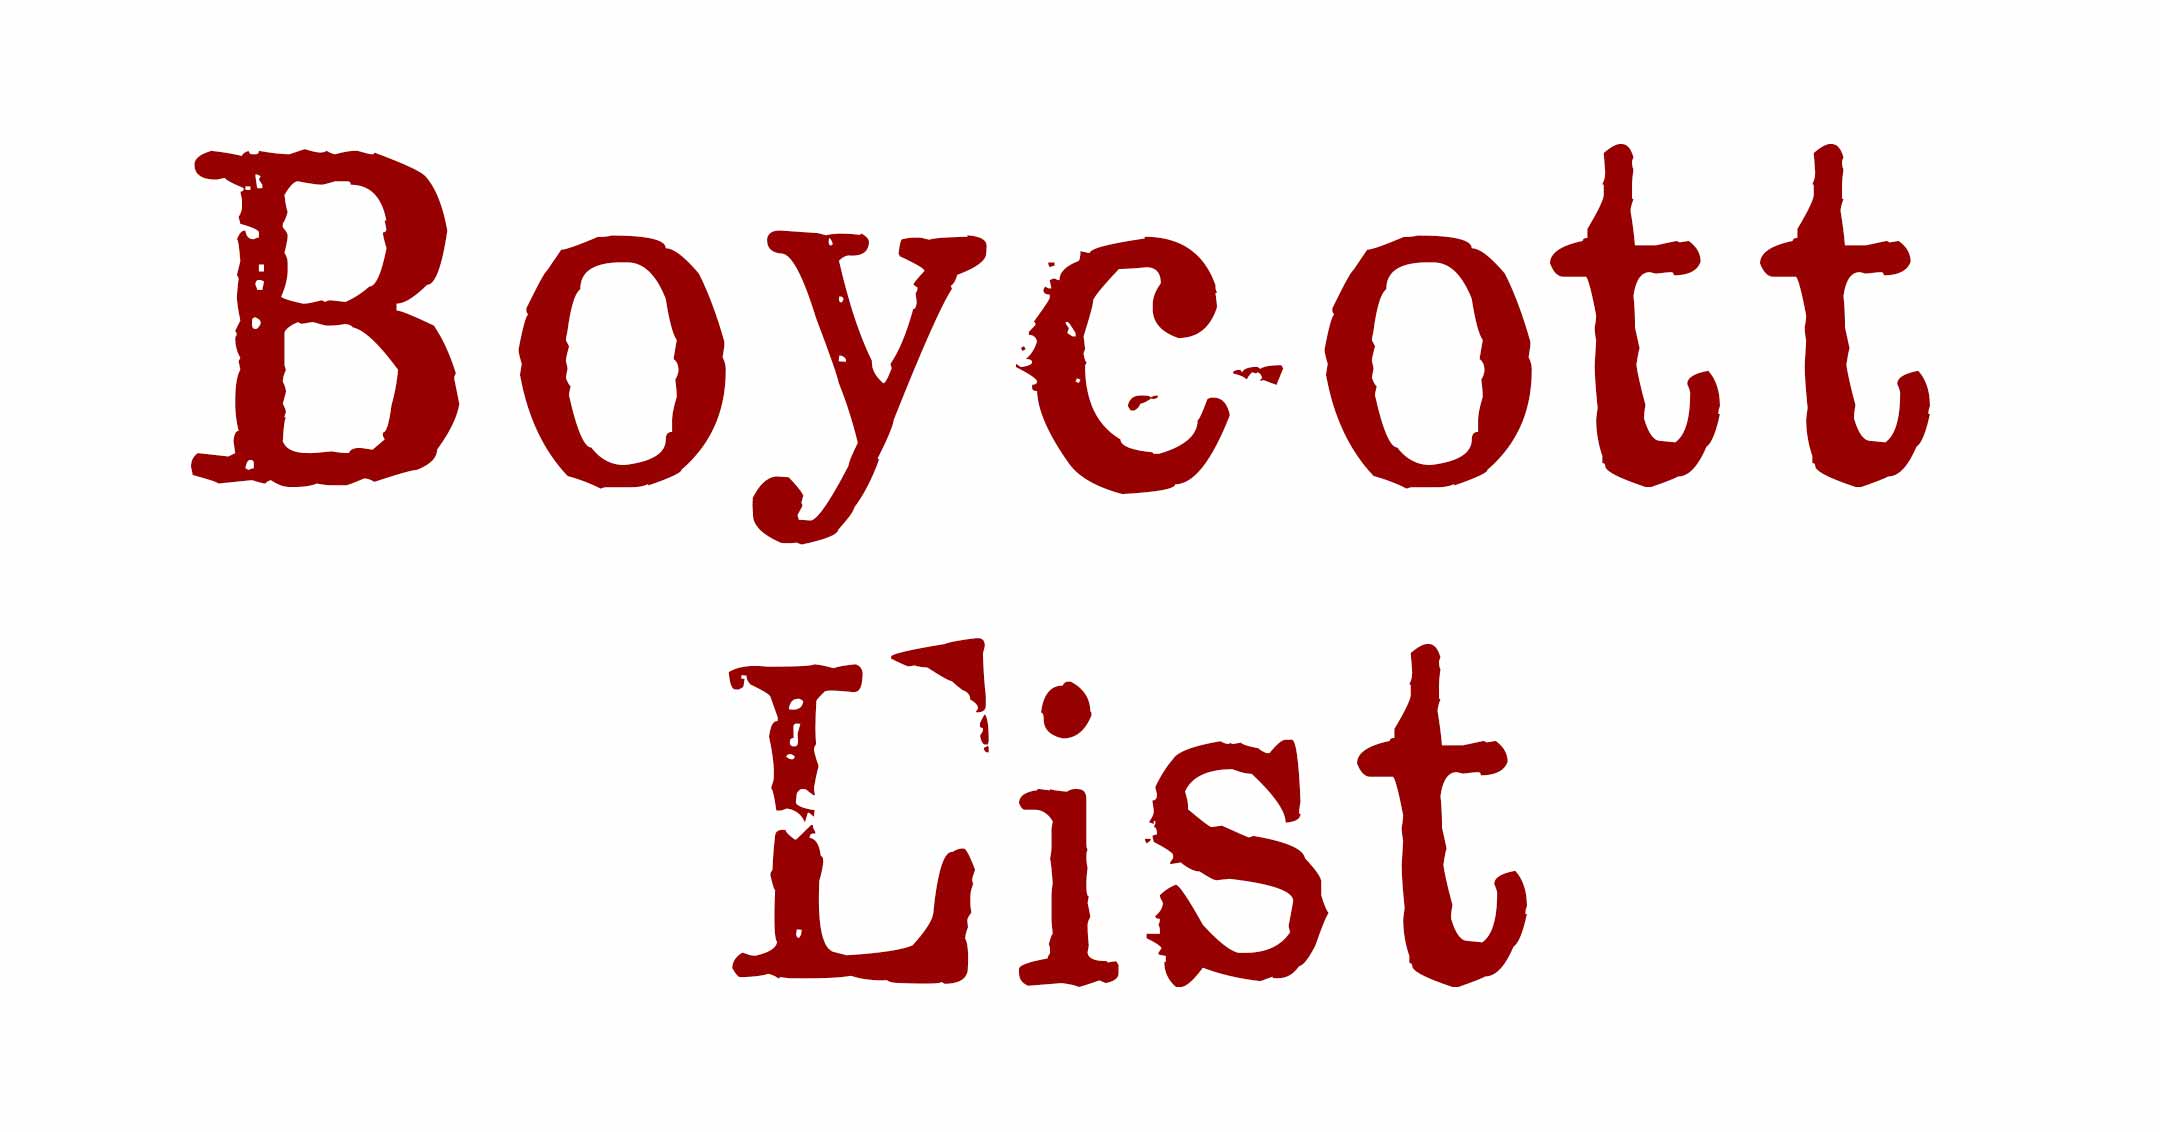 Actors and businesses worth boycotting